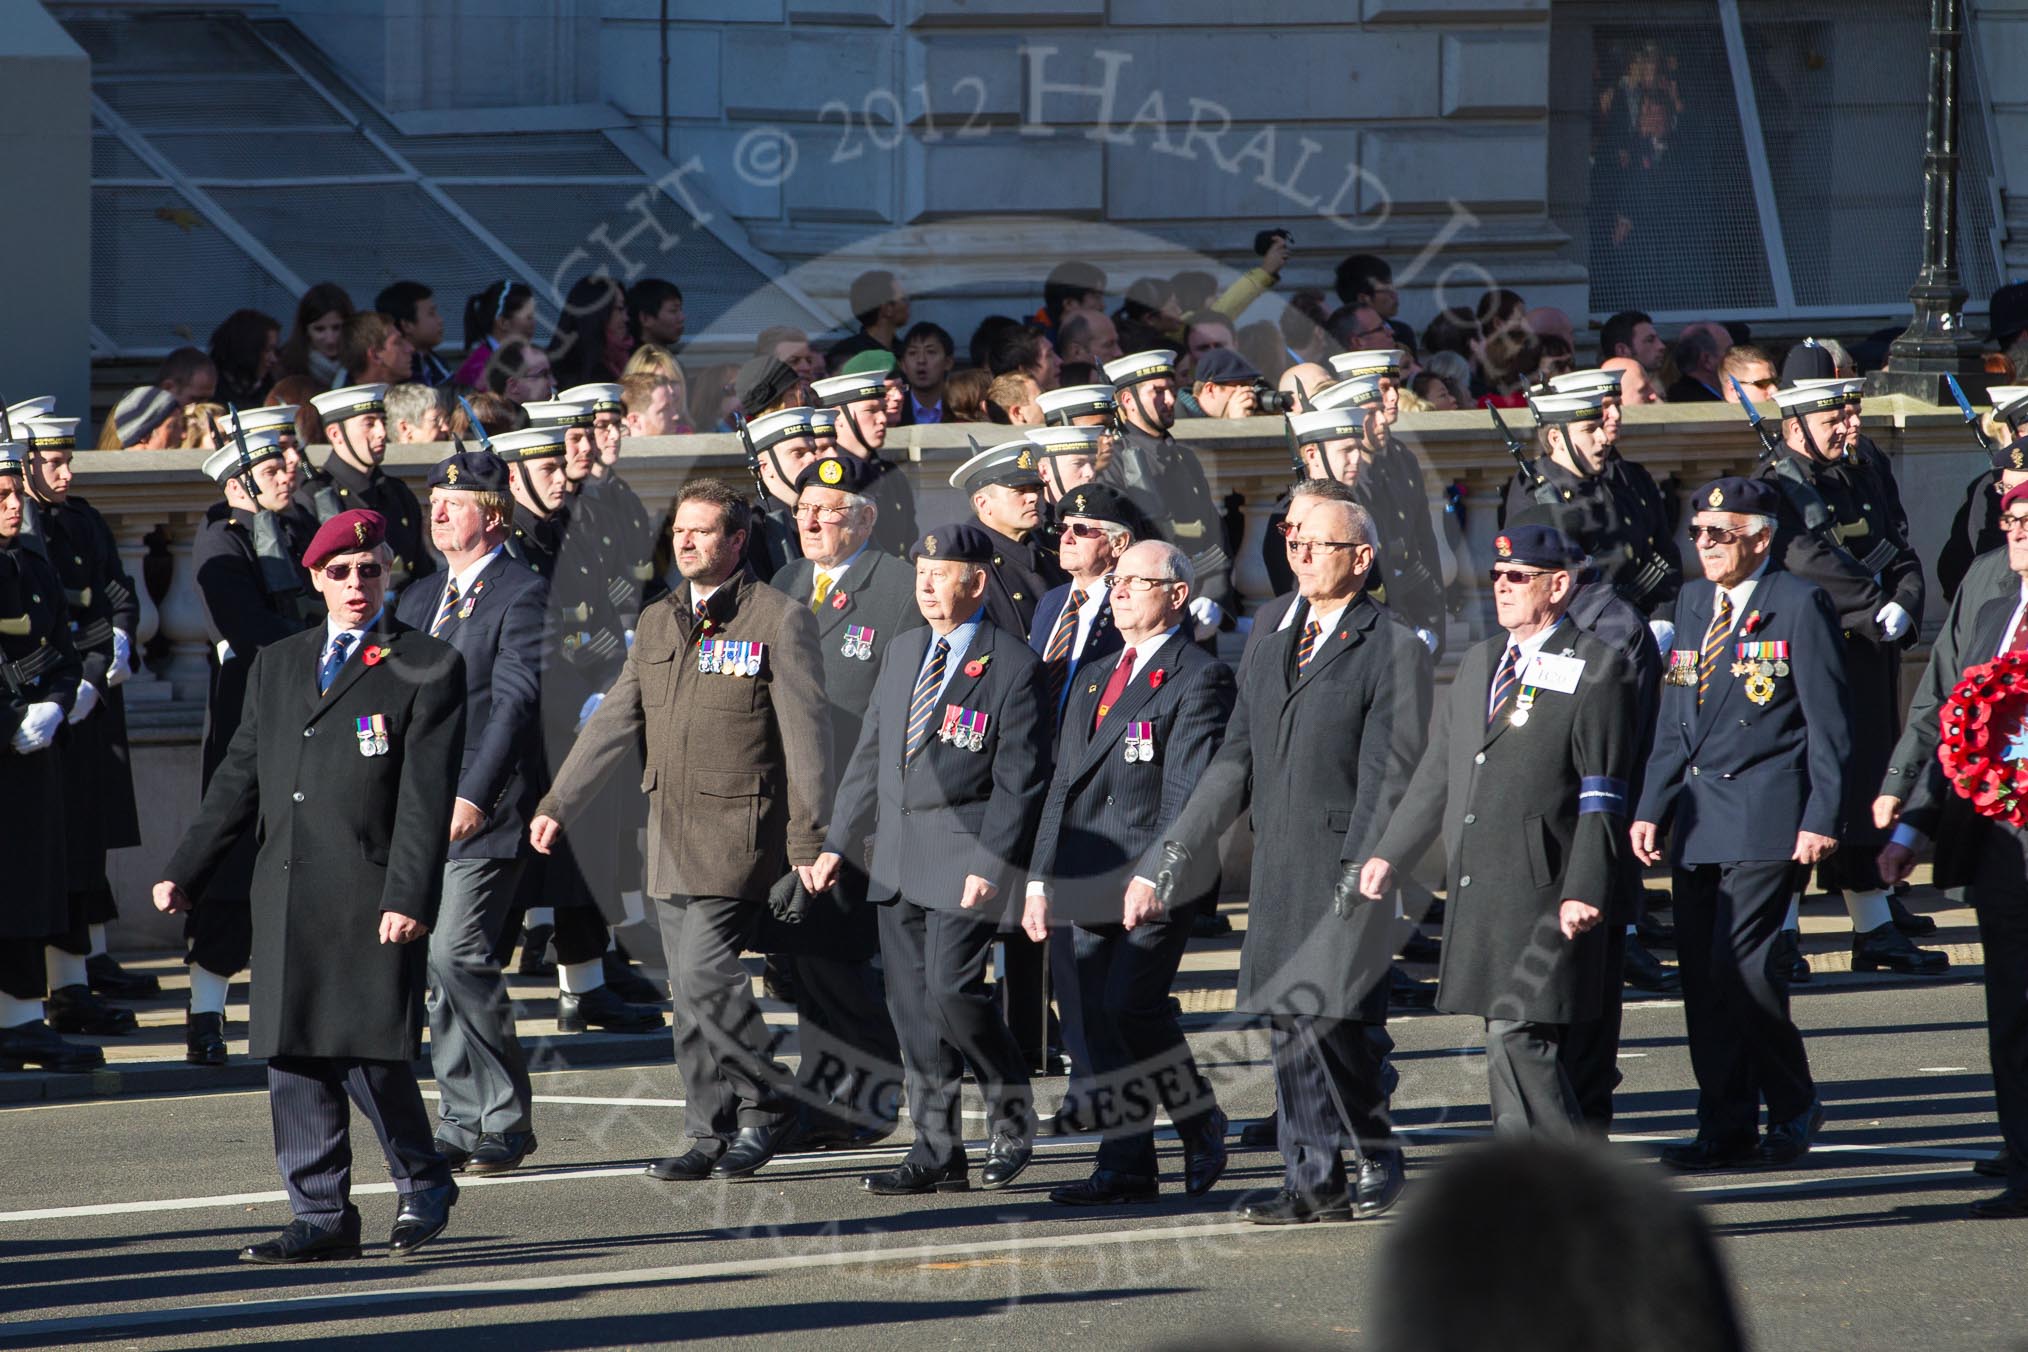 Remembrance Sunday 2012 Cenotaph March Past: Group B20 - Arborfield Old Boys Association..
Whitehall, Cenotaph,
London SW1,

United Kingdom,
on 11 November 2012 at 11:57, image #943